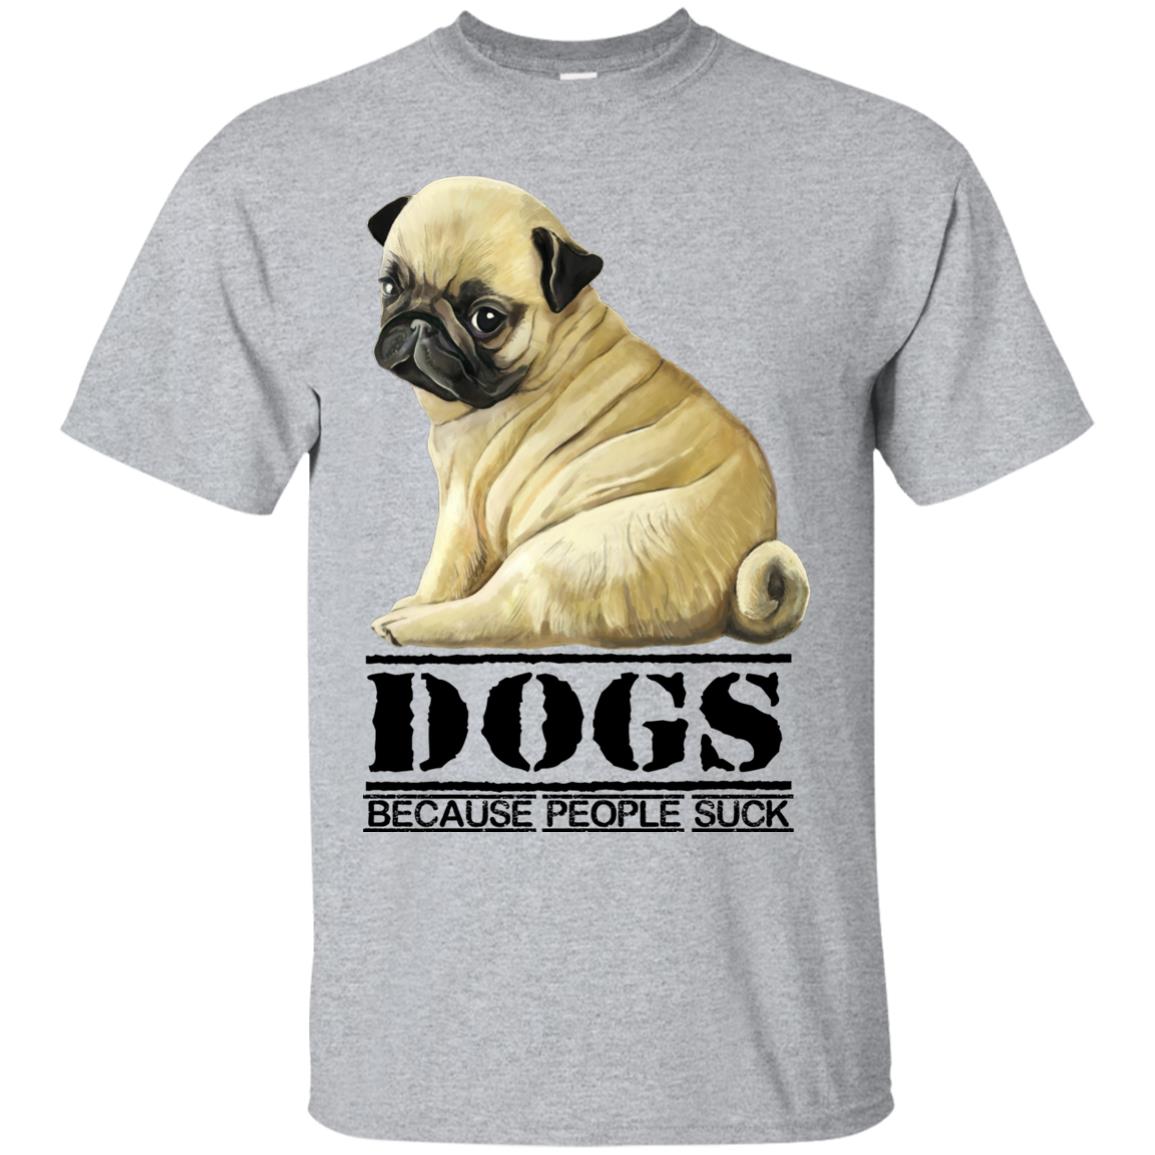 Pug T-Shirt - Funny Shirt for Dog Lover, DOGS Because People Suck - GoneBold.gift